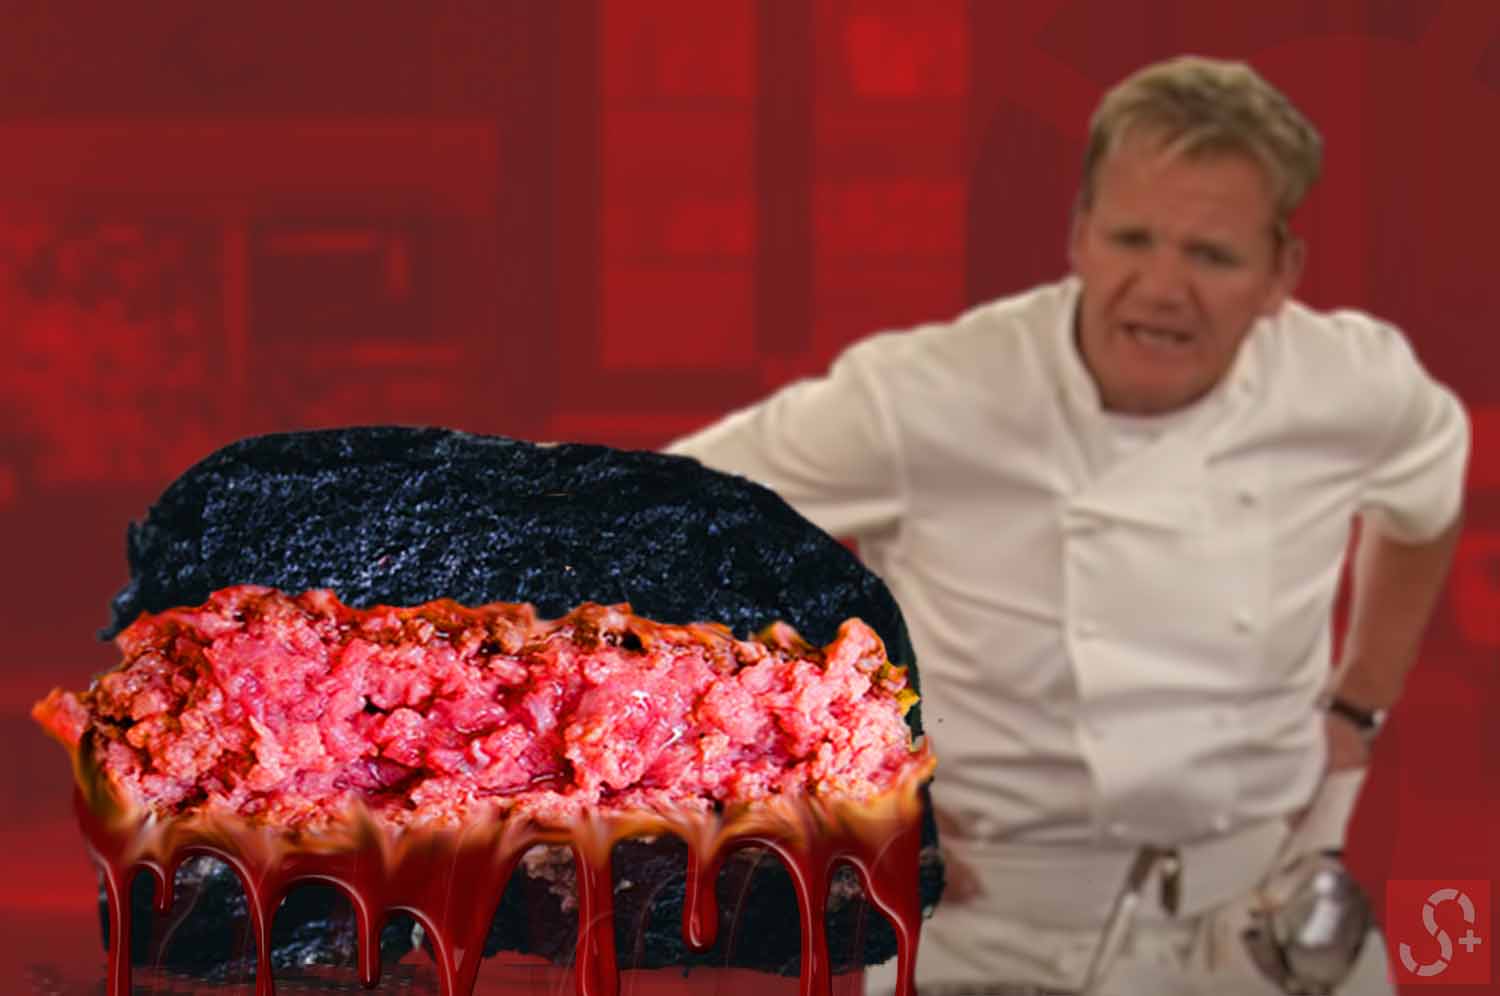 Burgers Patty burnt on outside raw on inside in front of a confused man and red background